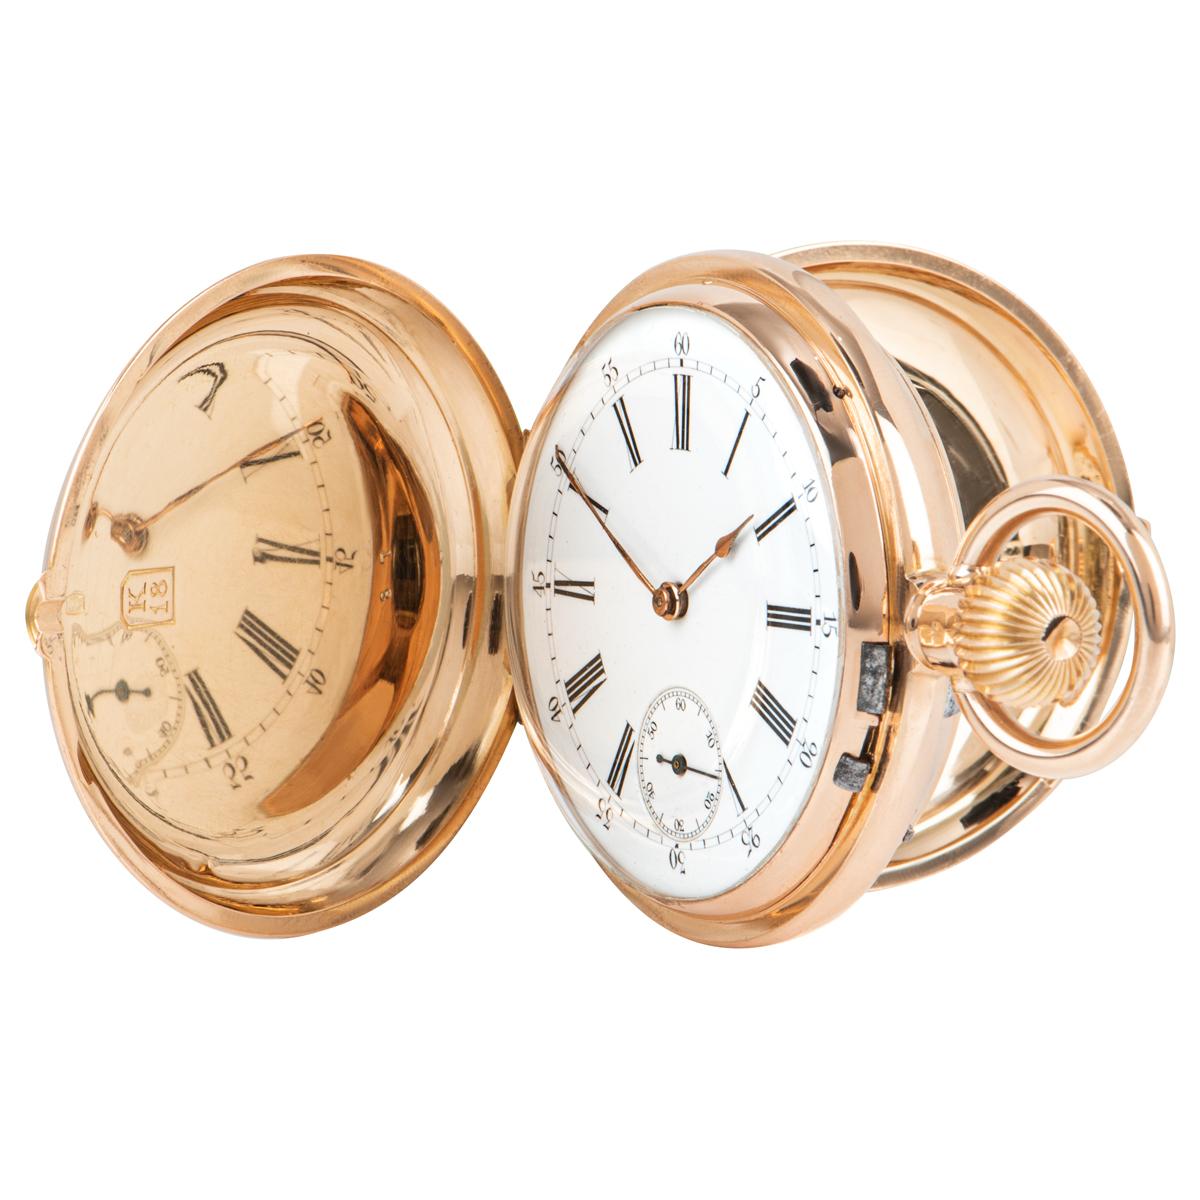 A Rare 18k Rose Gold Full Hunter Double Sided Calendar Vintage Gents Pocket Watch, white enamel dial with roman numerals, small seconds at 6 0'clock, enamel chapter ring on the reverse side with the date and day display indicator, a fixed 18k rose